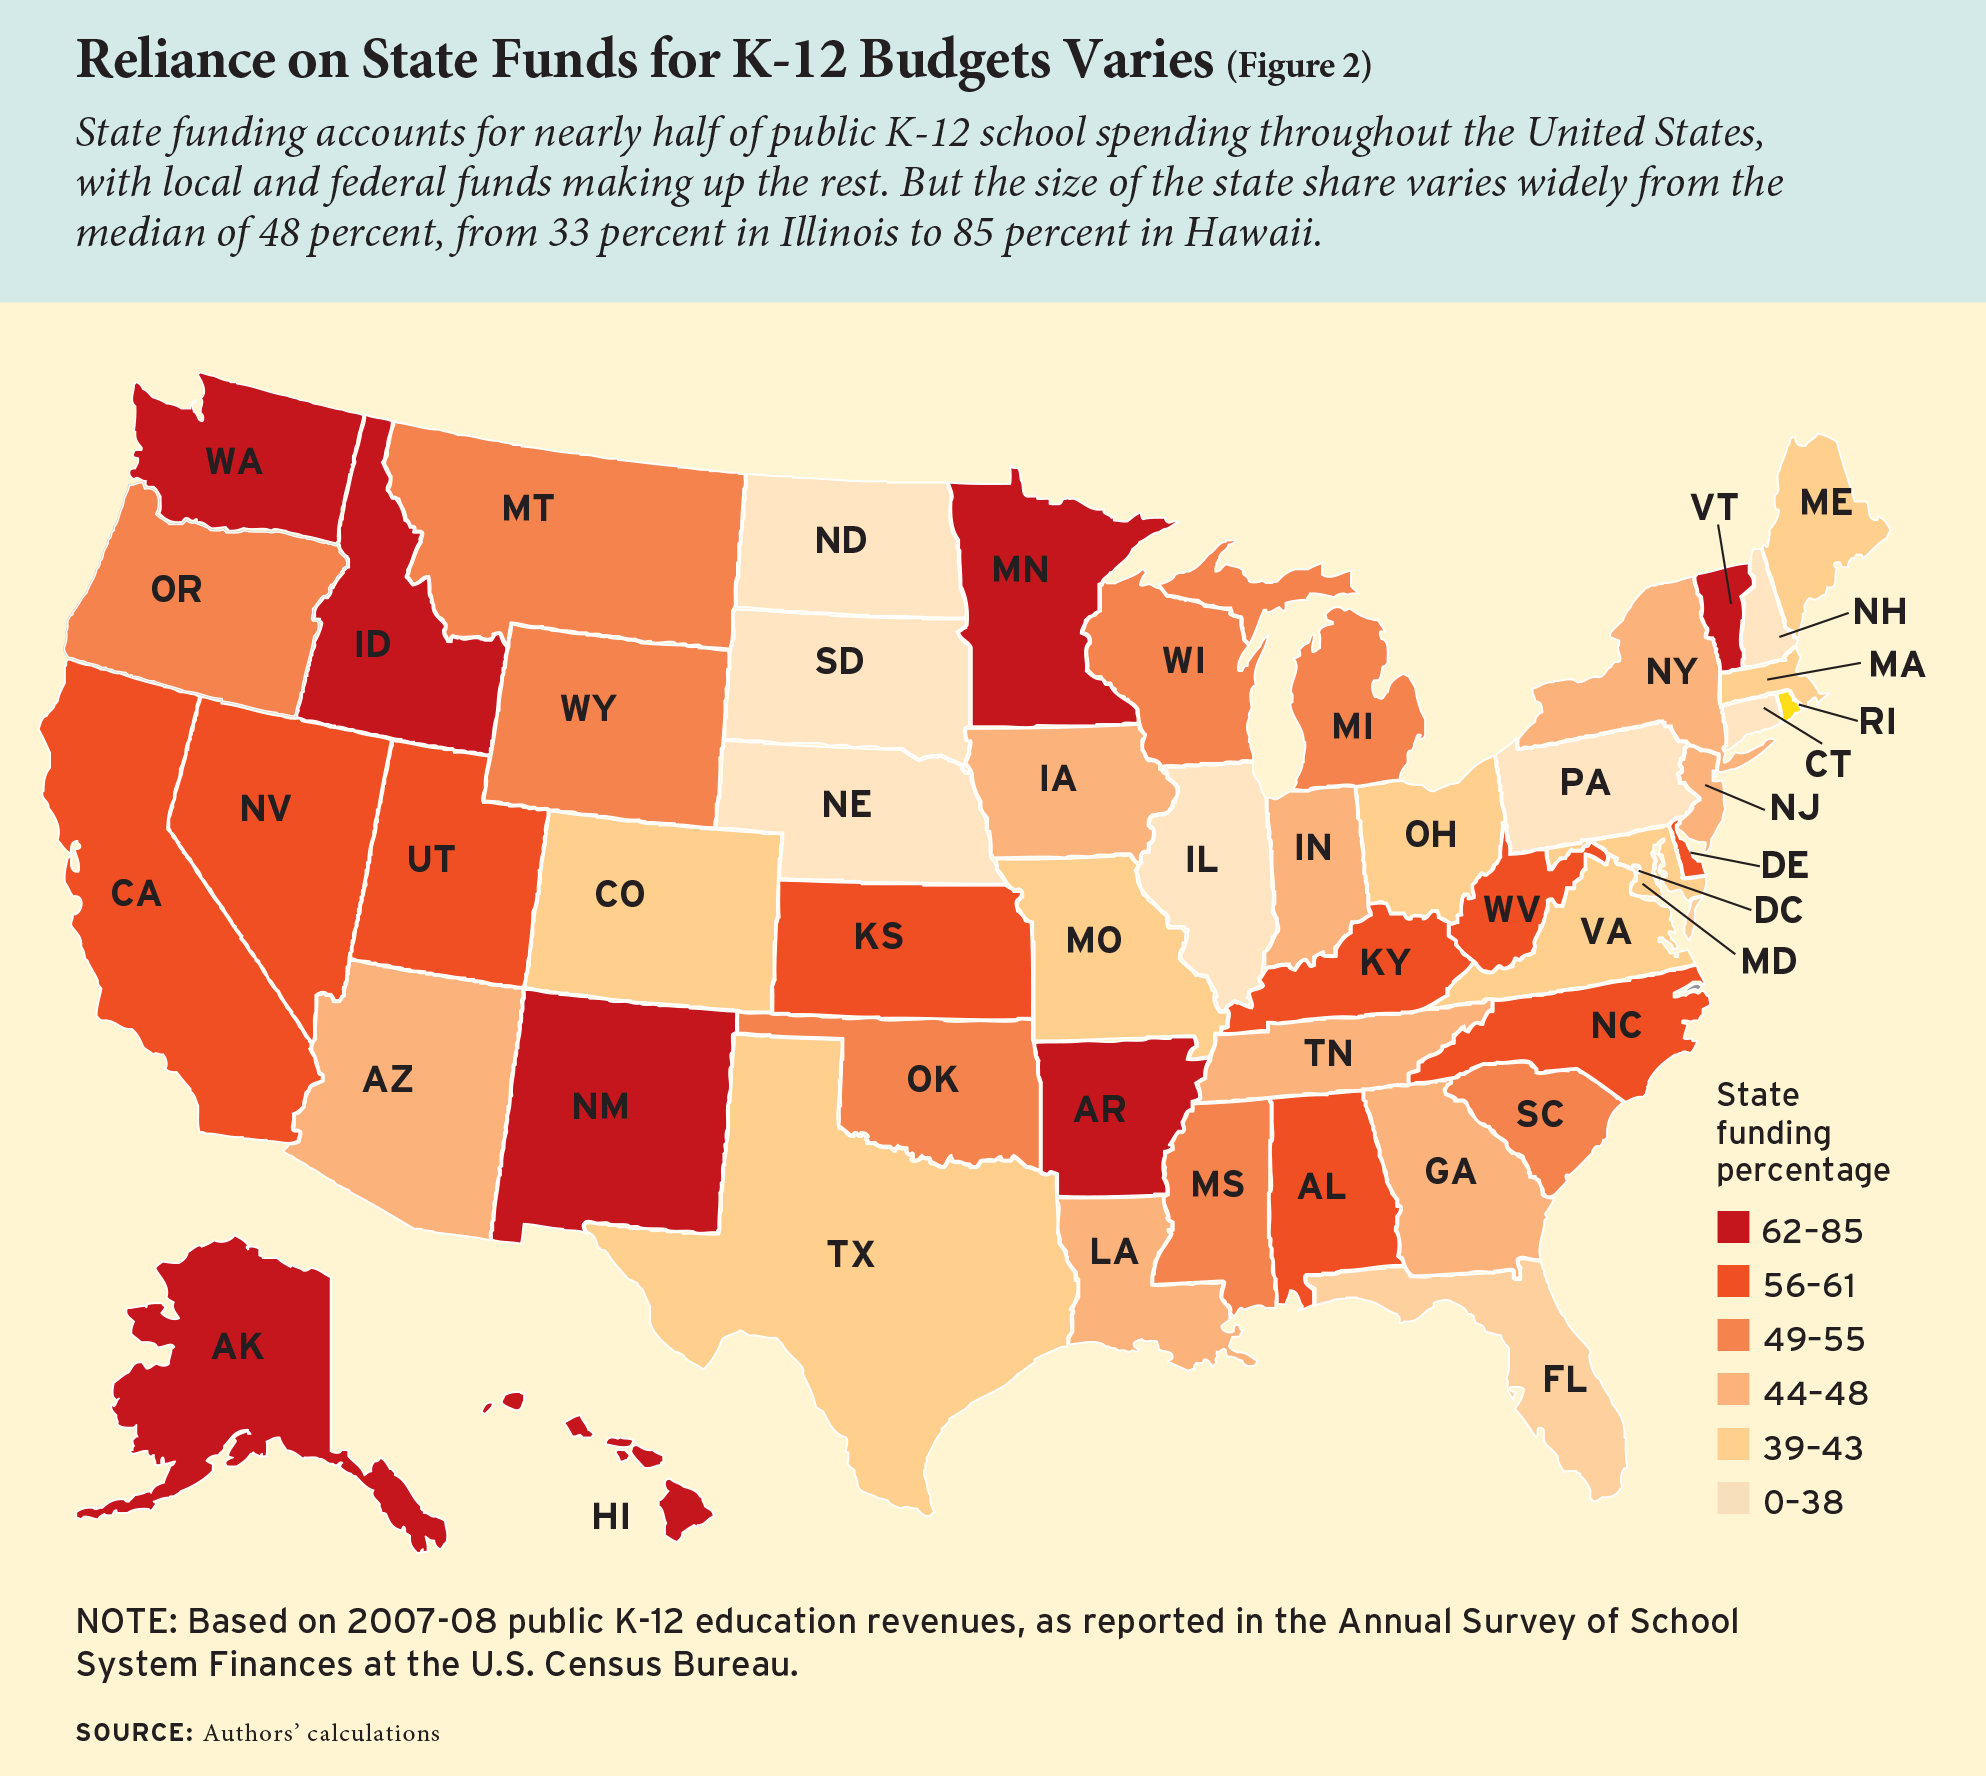 Figure 2: Reliance on State Funds for K-12 Budgets Varies